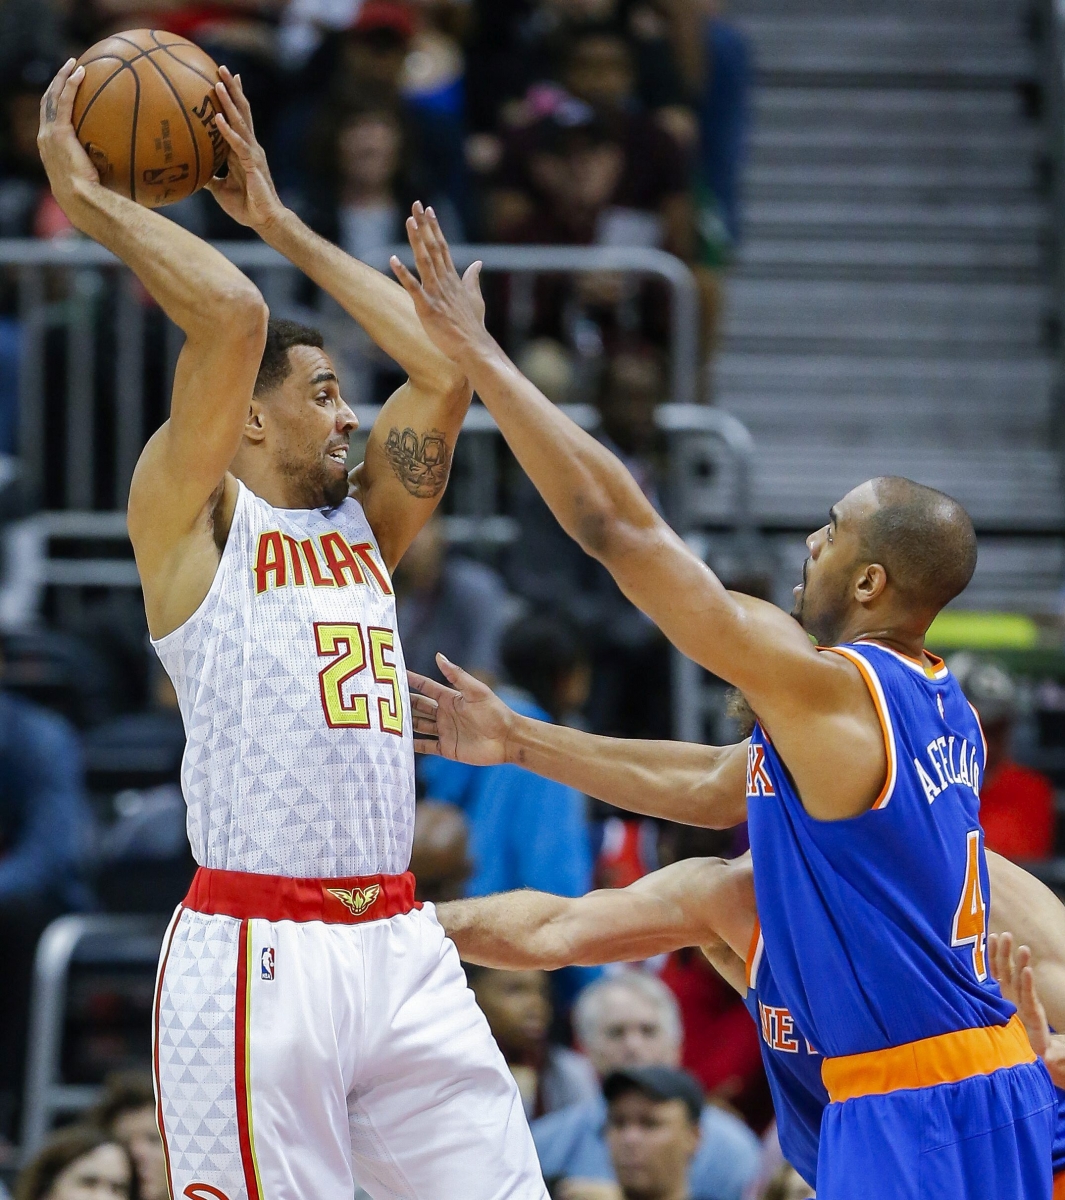 epa05081457 Atlanta Hawks forward Thabo Sefolosha (L) of Switzerland is defended by New York Knicks guard Arron Afflalo (R) during the first half of their NBA basketball game at Philips Arena in Atlanta, Georgia, USA, 26 December 2015.  EPA/ERIK S. LESSER CORBIS OUT